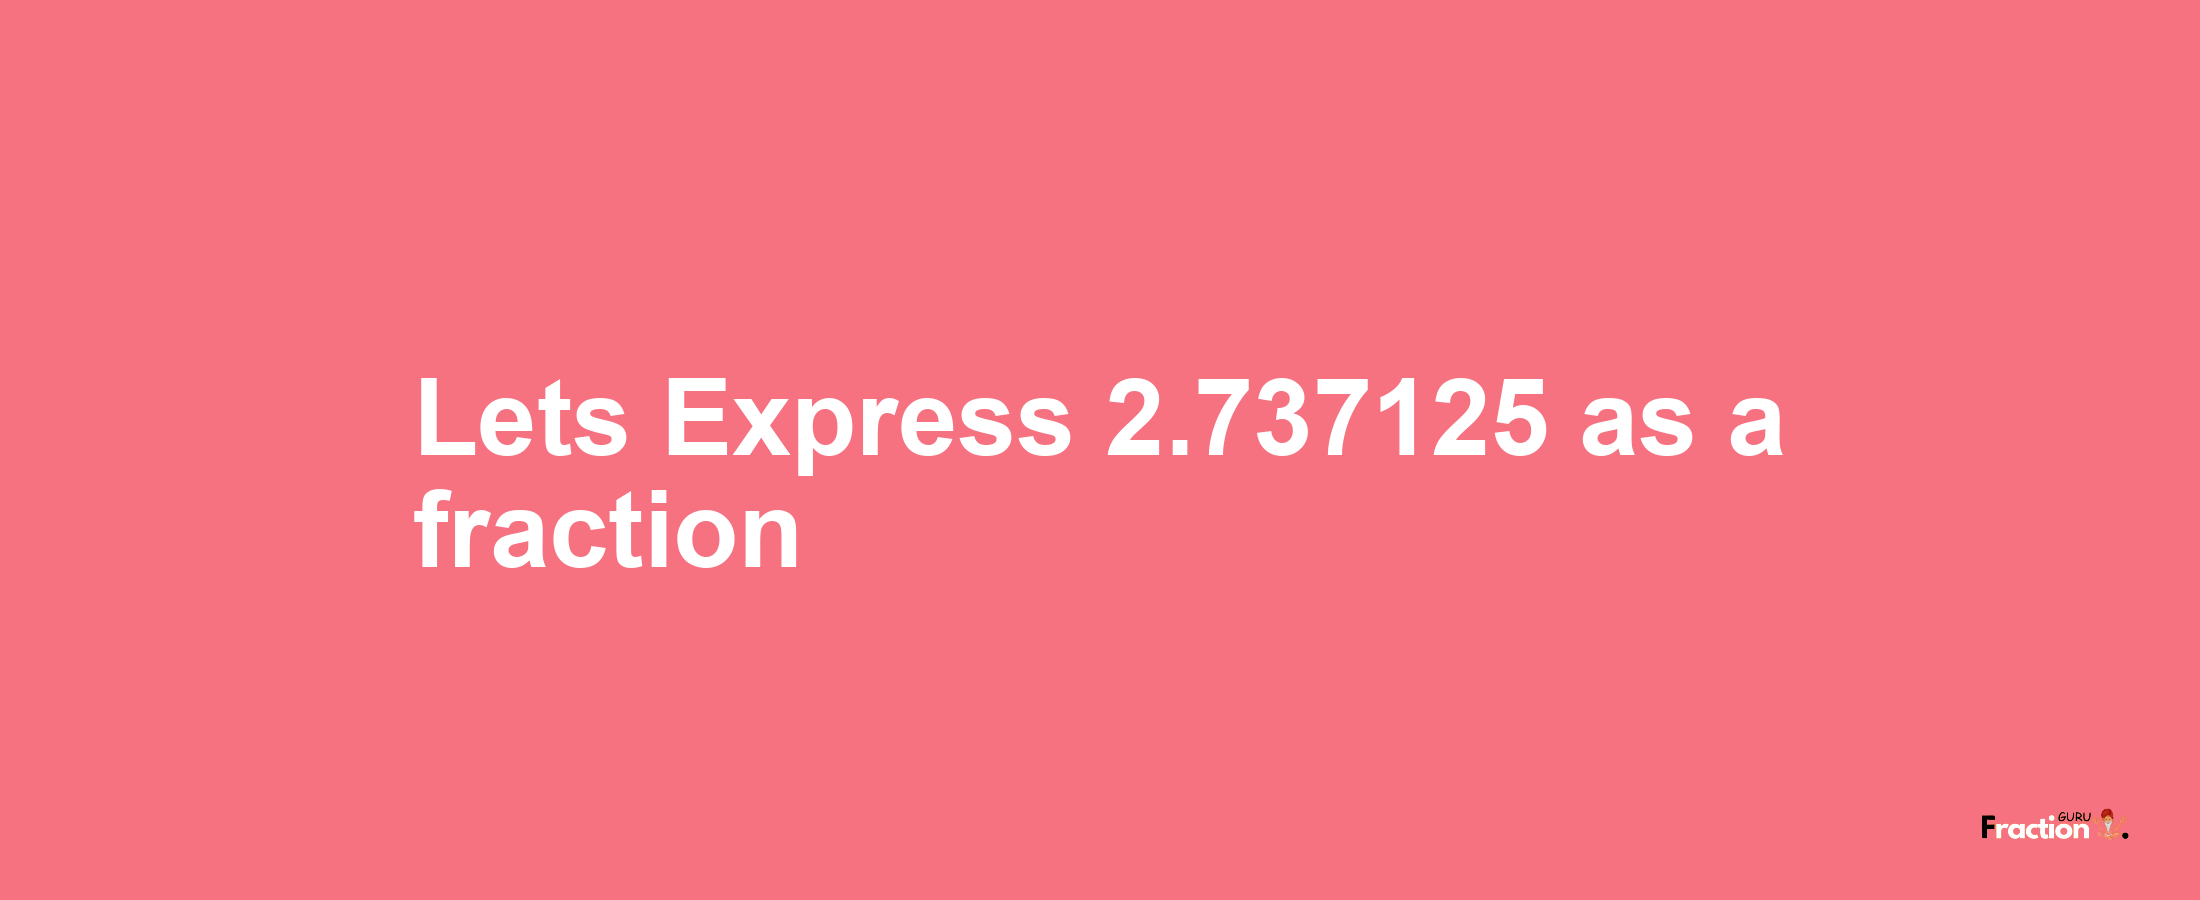 Lets Express 2.737125 as afraction